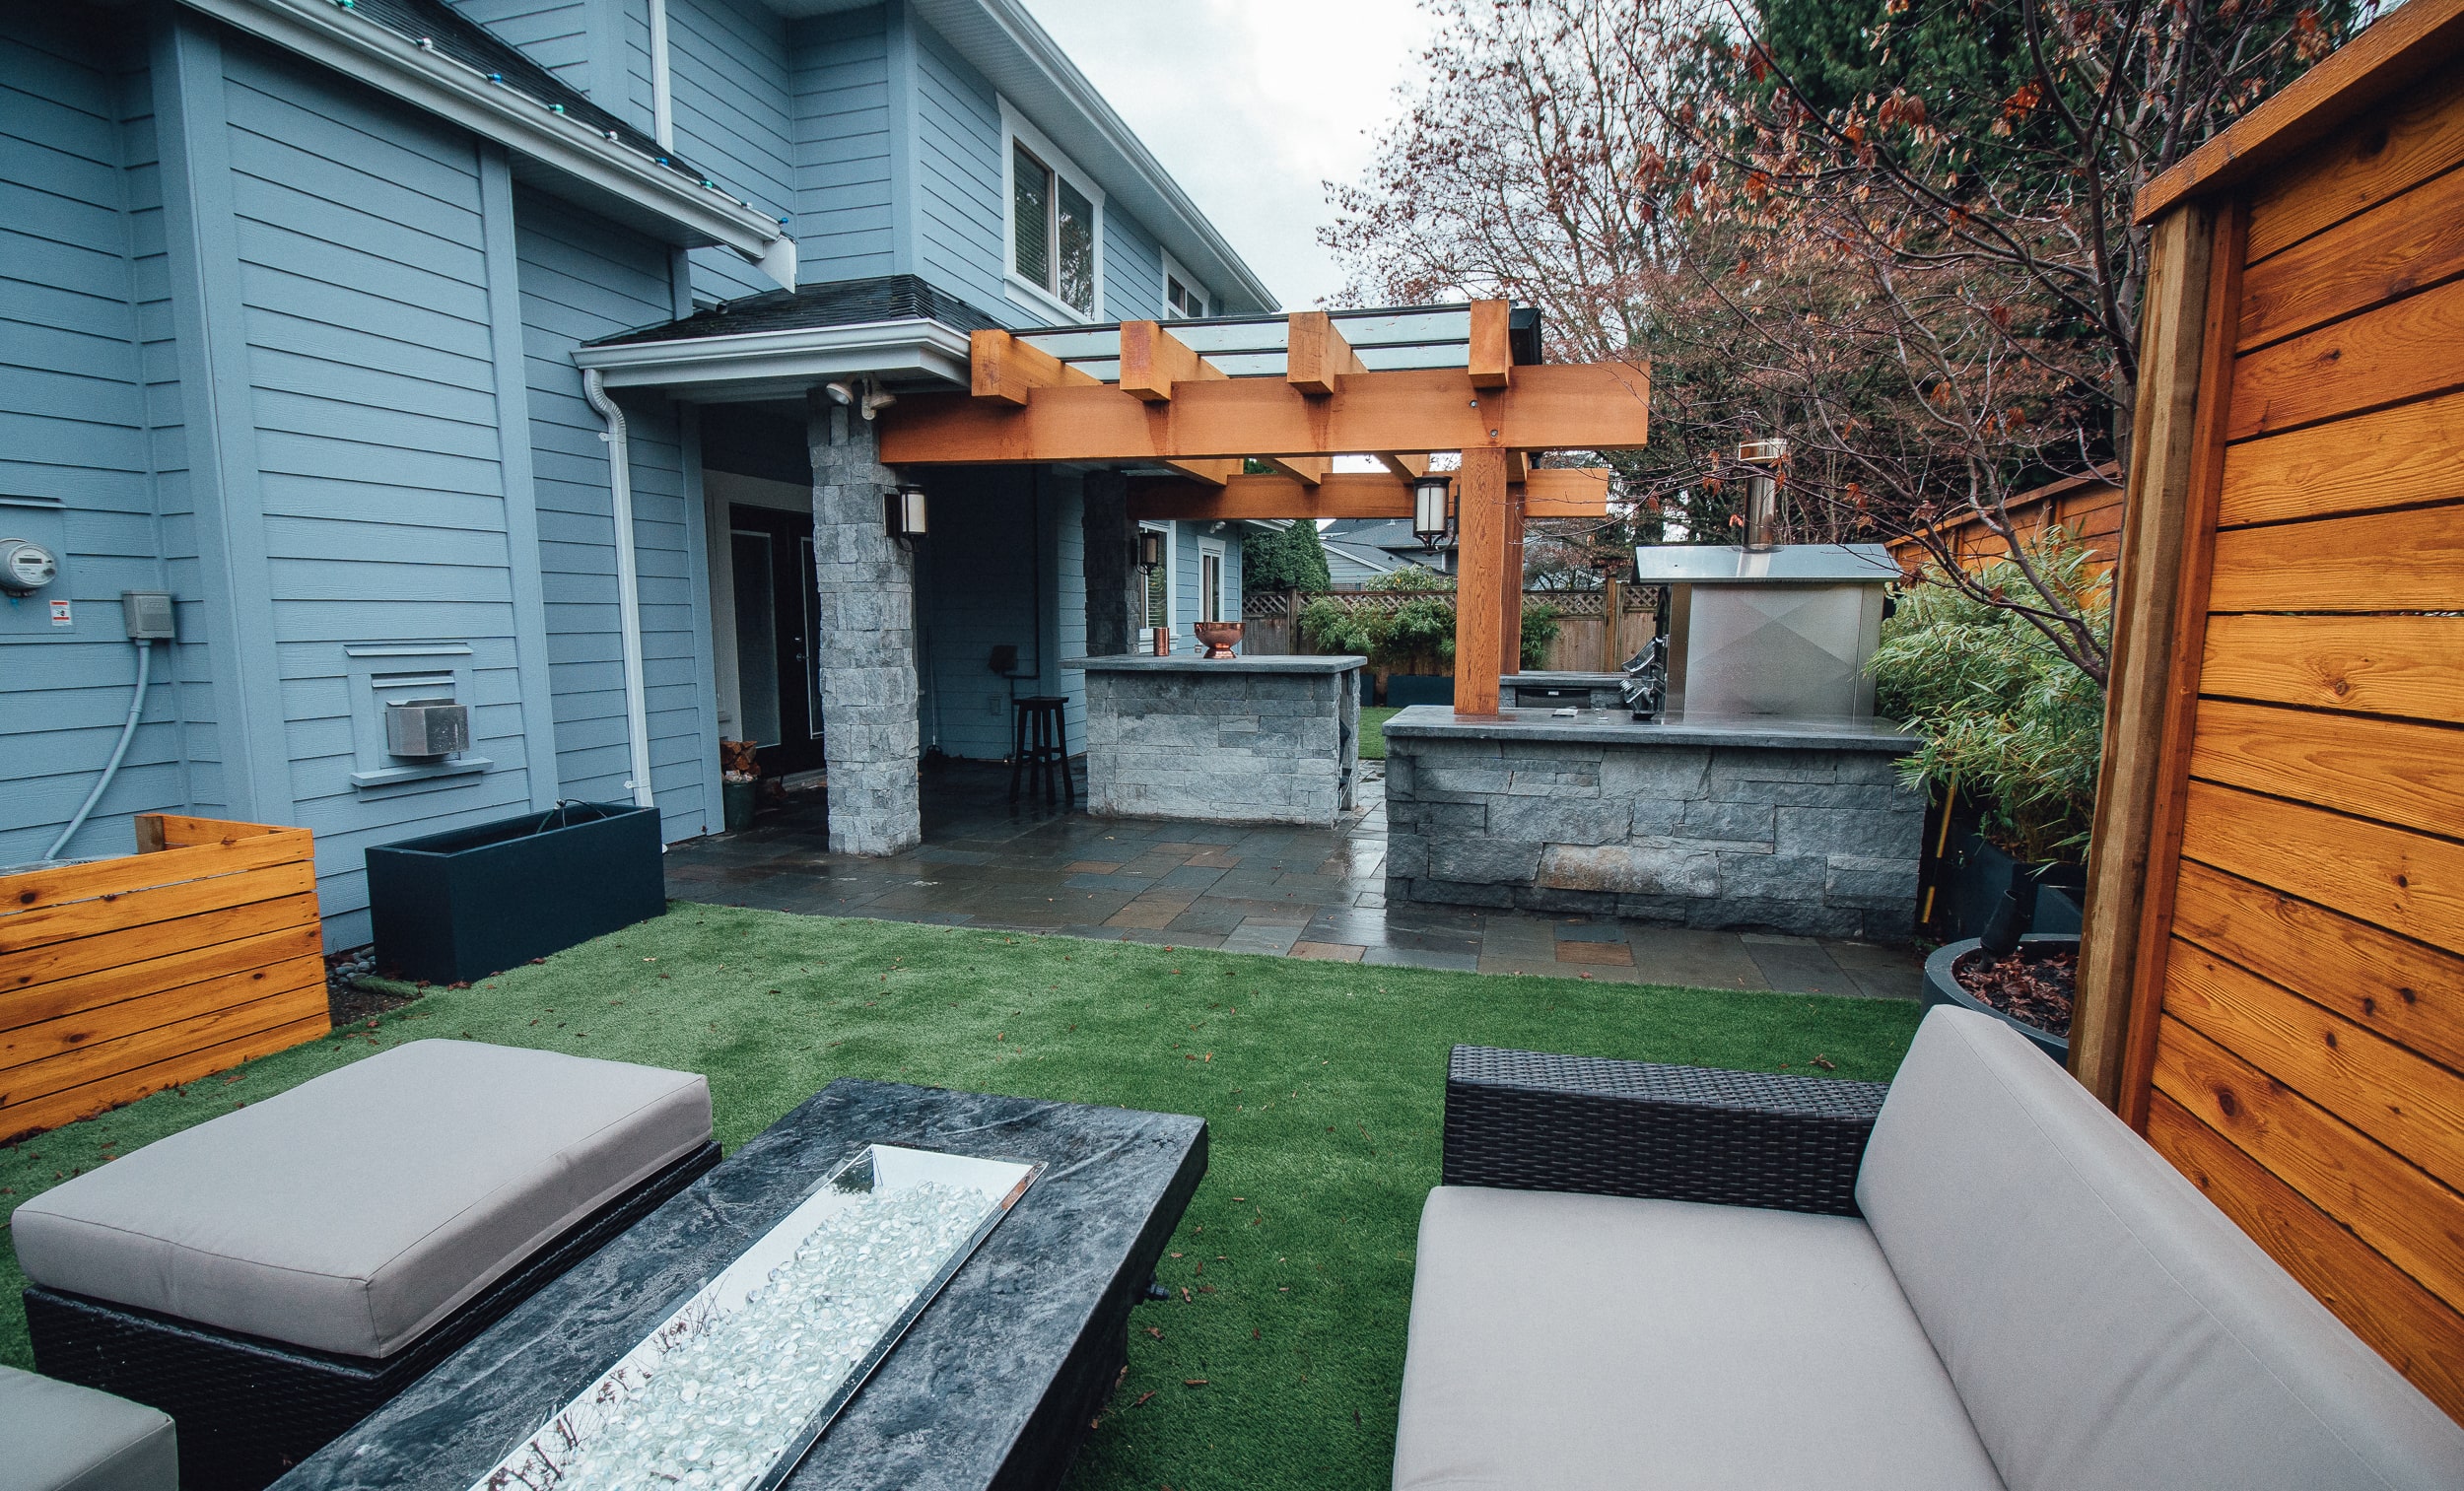 A backyard garden landscape with outdoor furniture and a grill in the background.